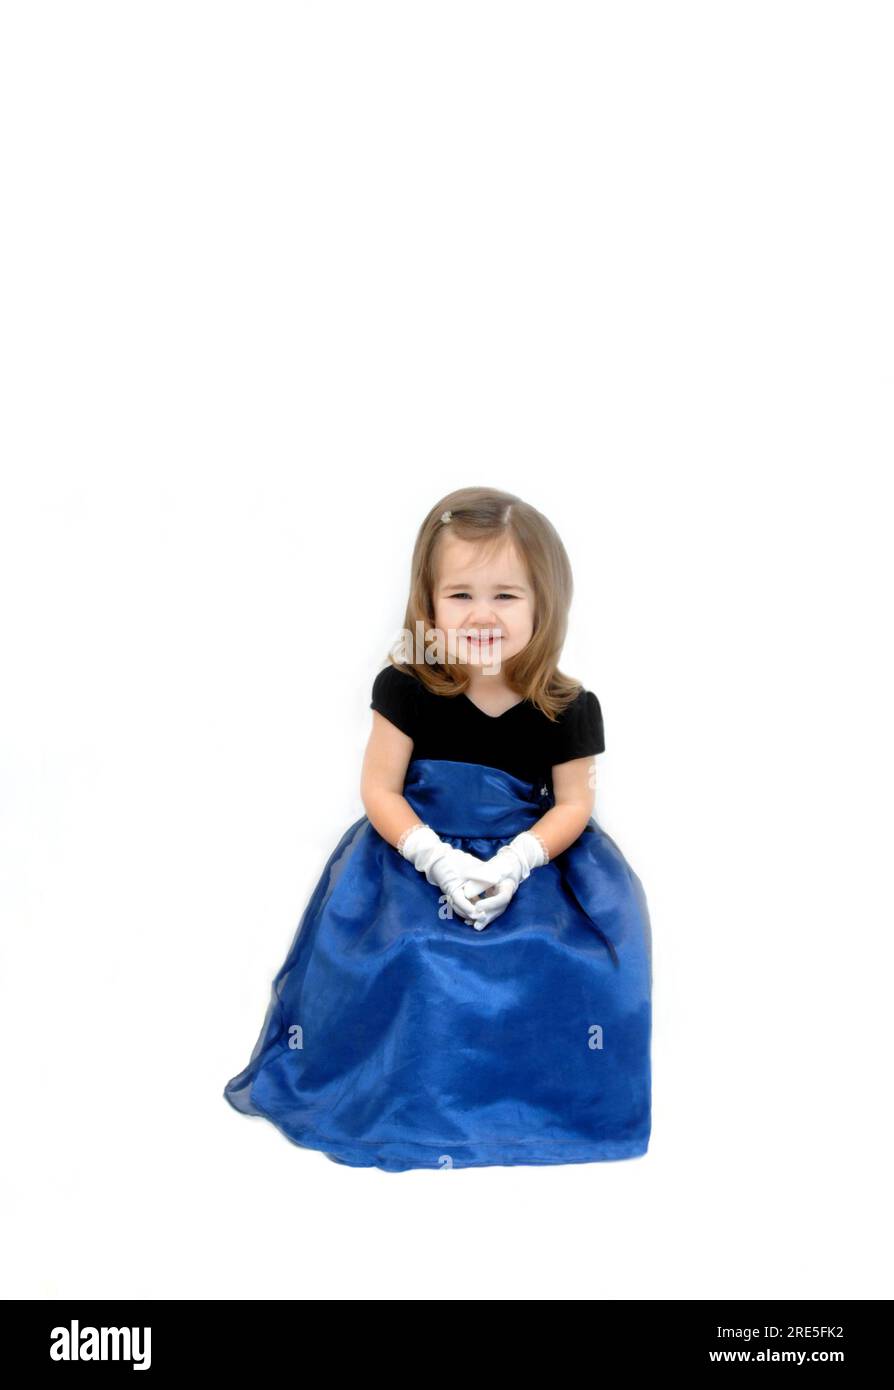 Little girl is wearing a royal blue gauze dress with velvet bodice.  She has long hair and is seated in an all white room. Stock Photo